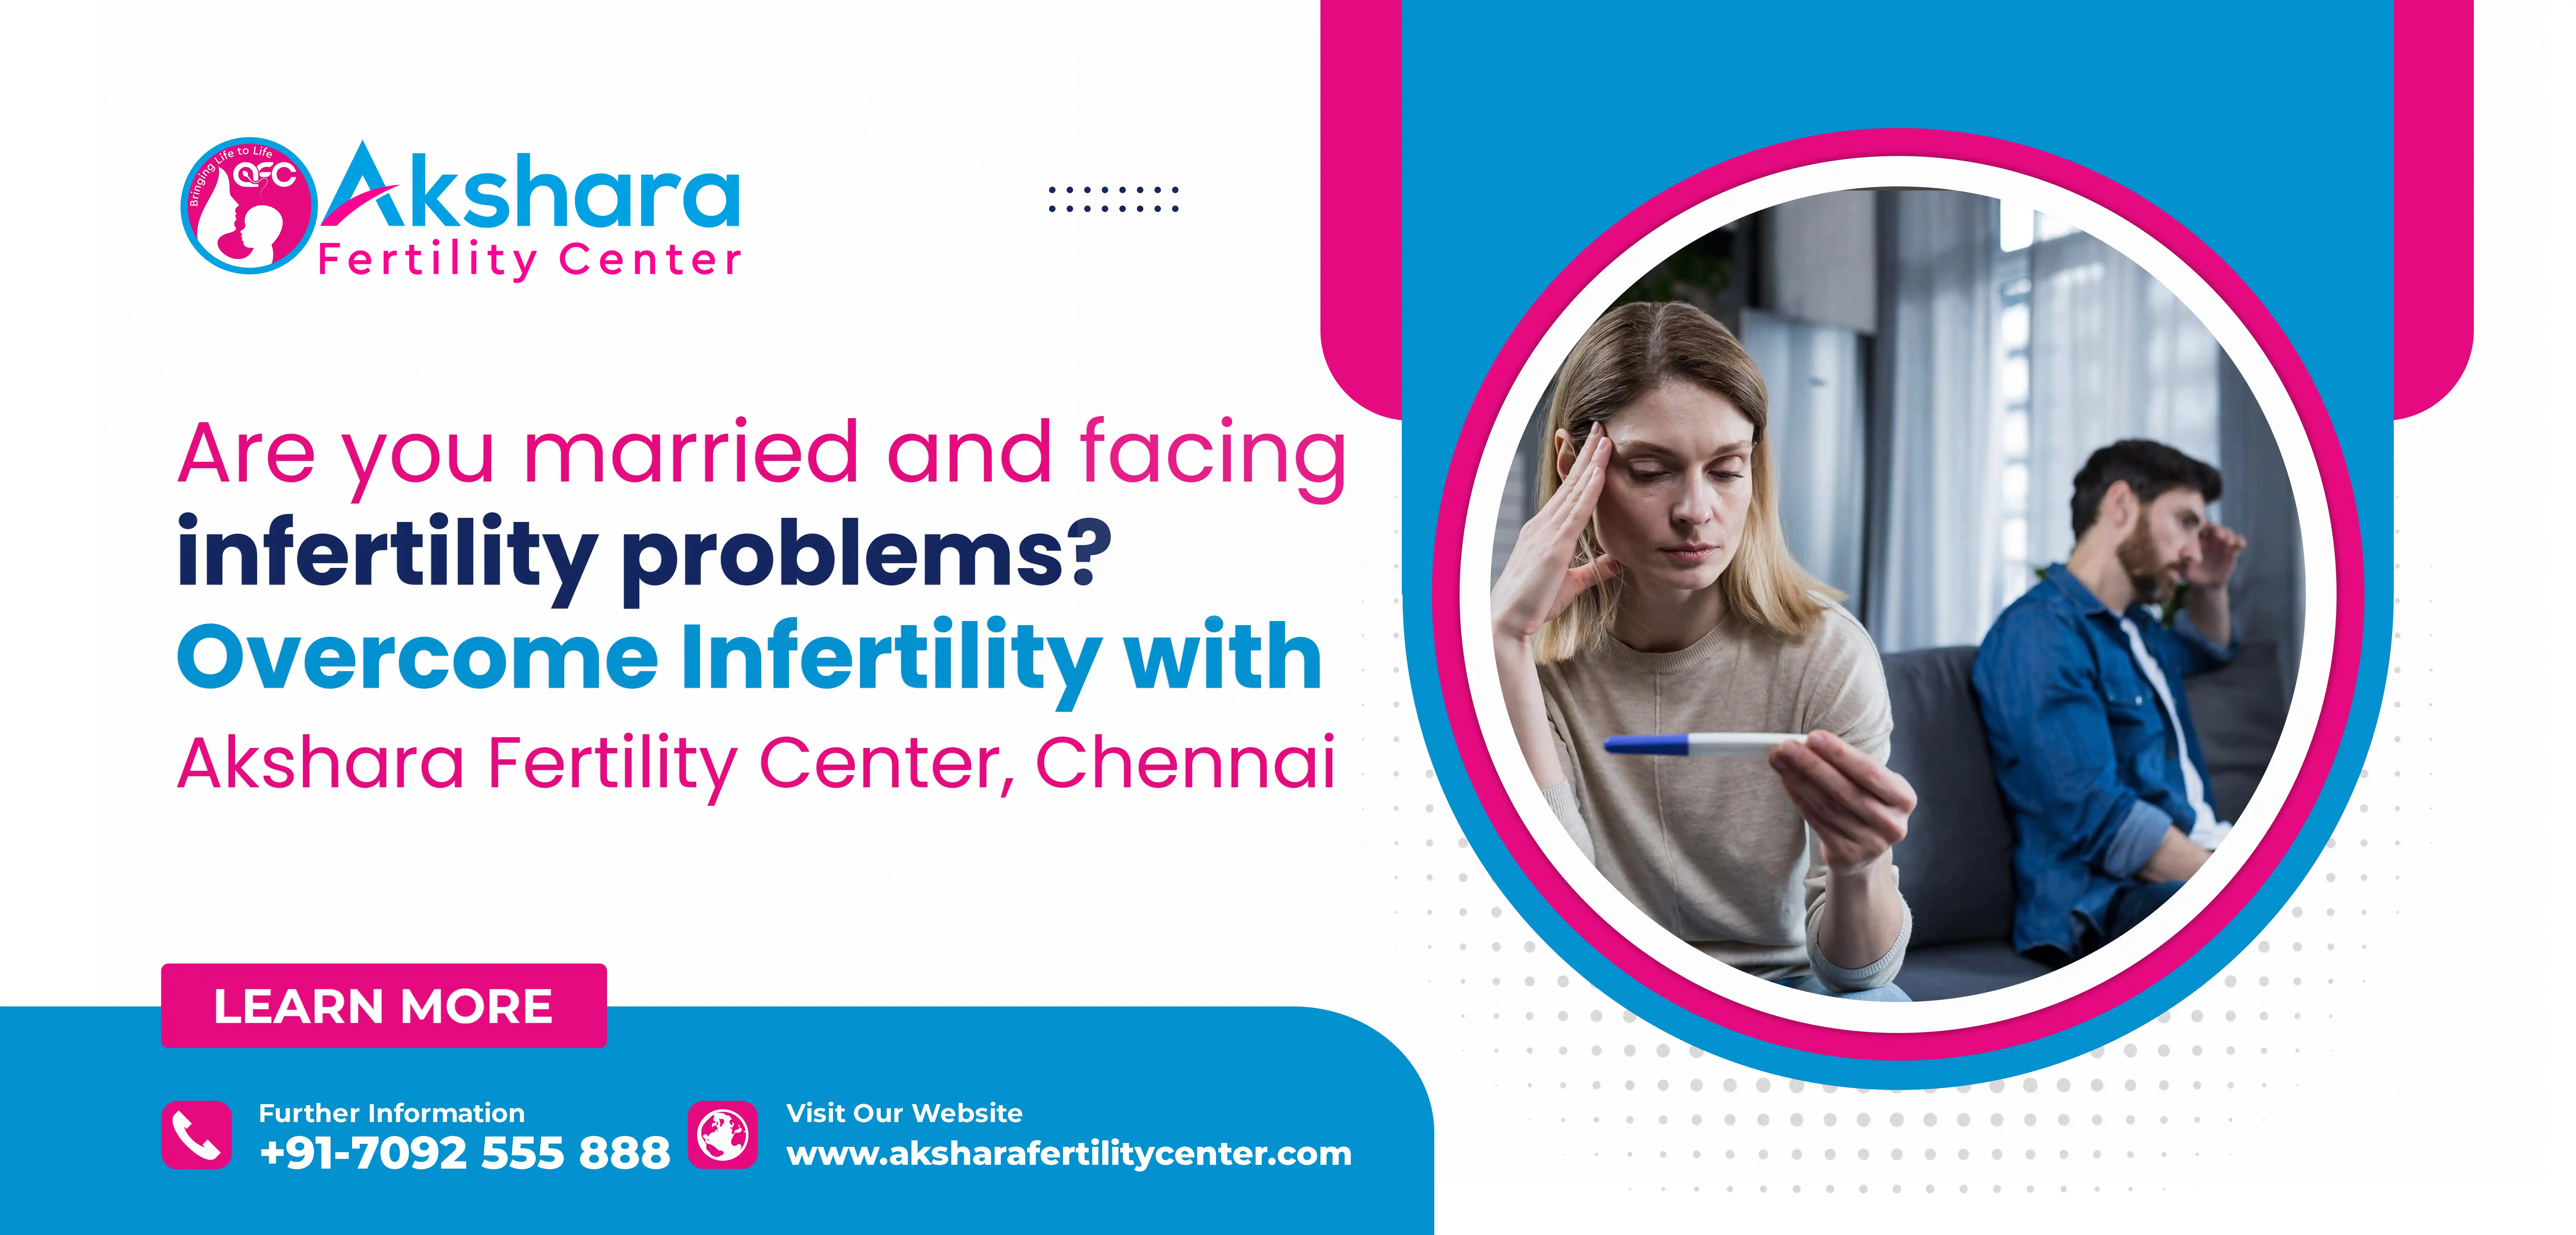 Are you married and facing infertility problems? Overcome Infertility with Akshara Fertility Center, Chennai